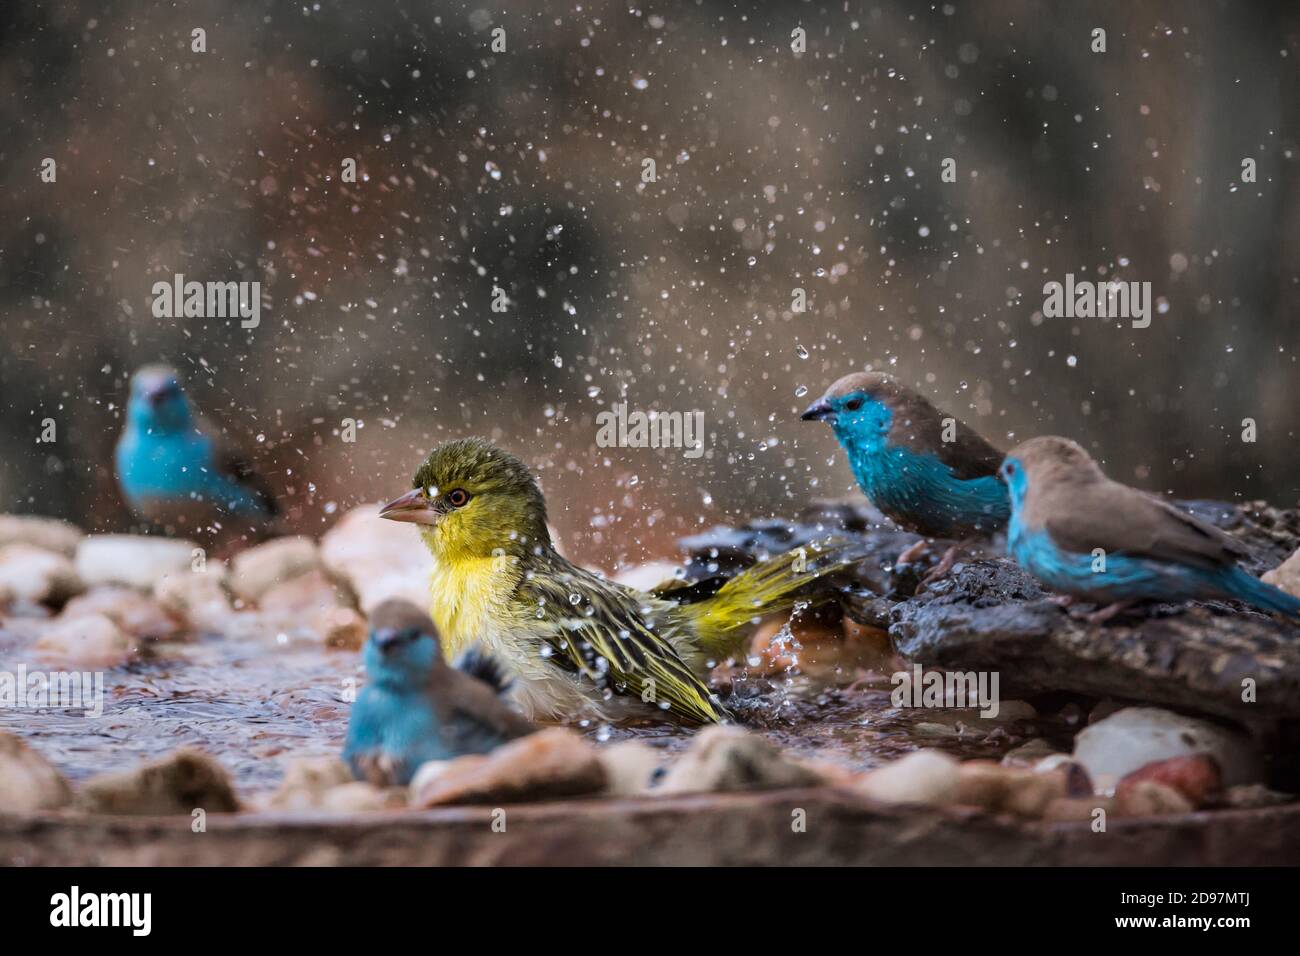 Village weaver Ploceus cucullatus and blue breasted cordonbleu Uraeginthus angolensis bathing in waterhole in Kruger National park, South Africa Stock Photo